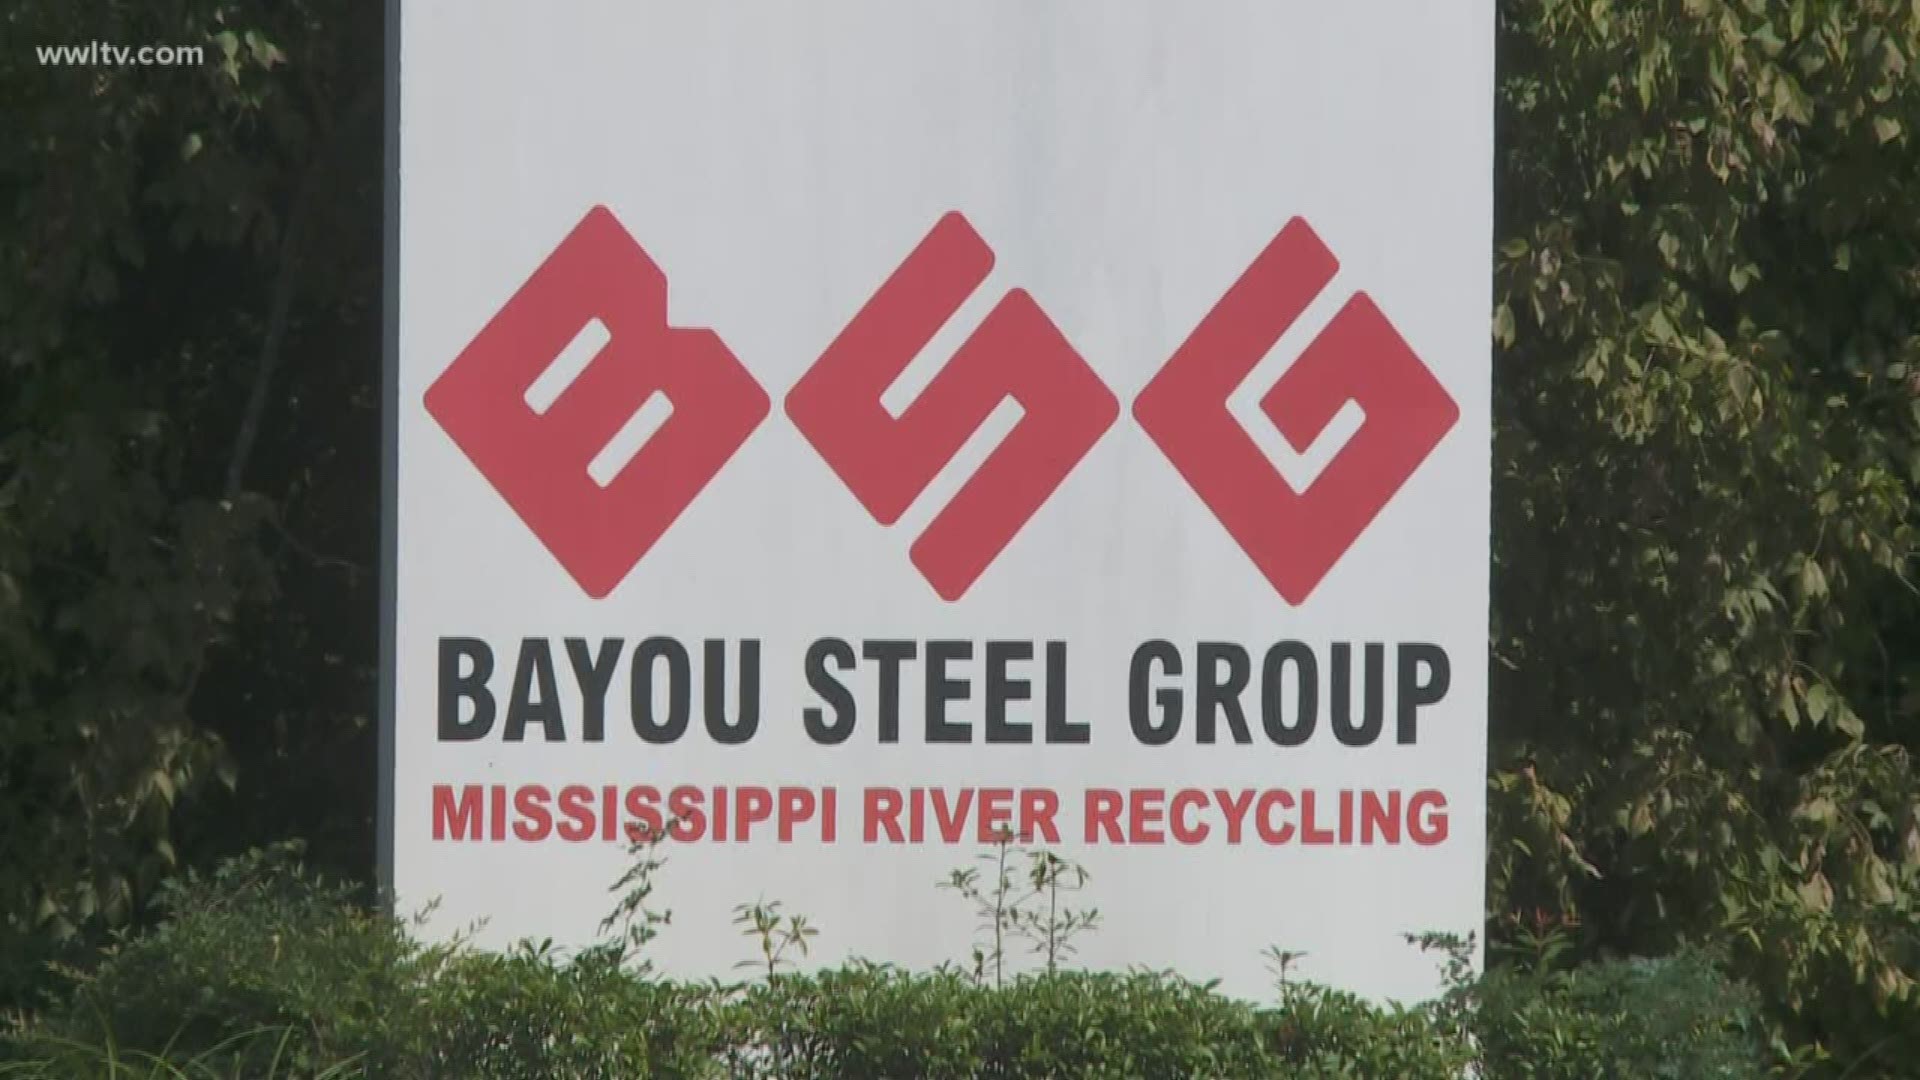 Liberty’s current plan is to upgrade the idle steel mill and restart recycling operations in the second half of 2020 and steel making in 2021.